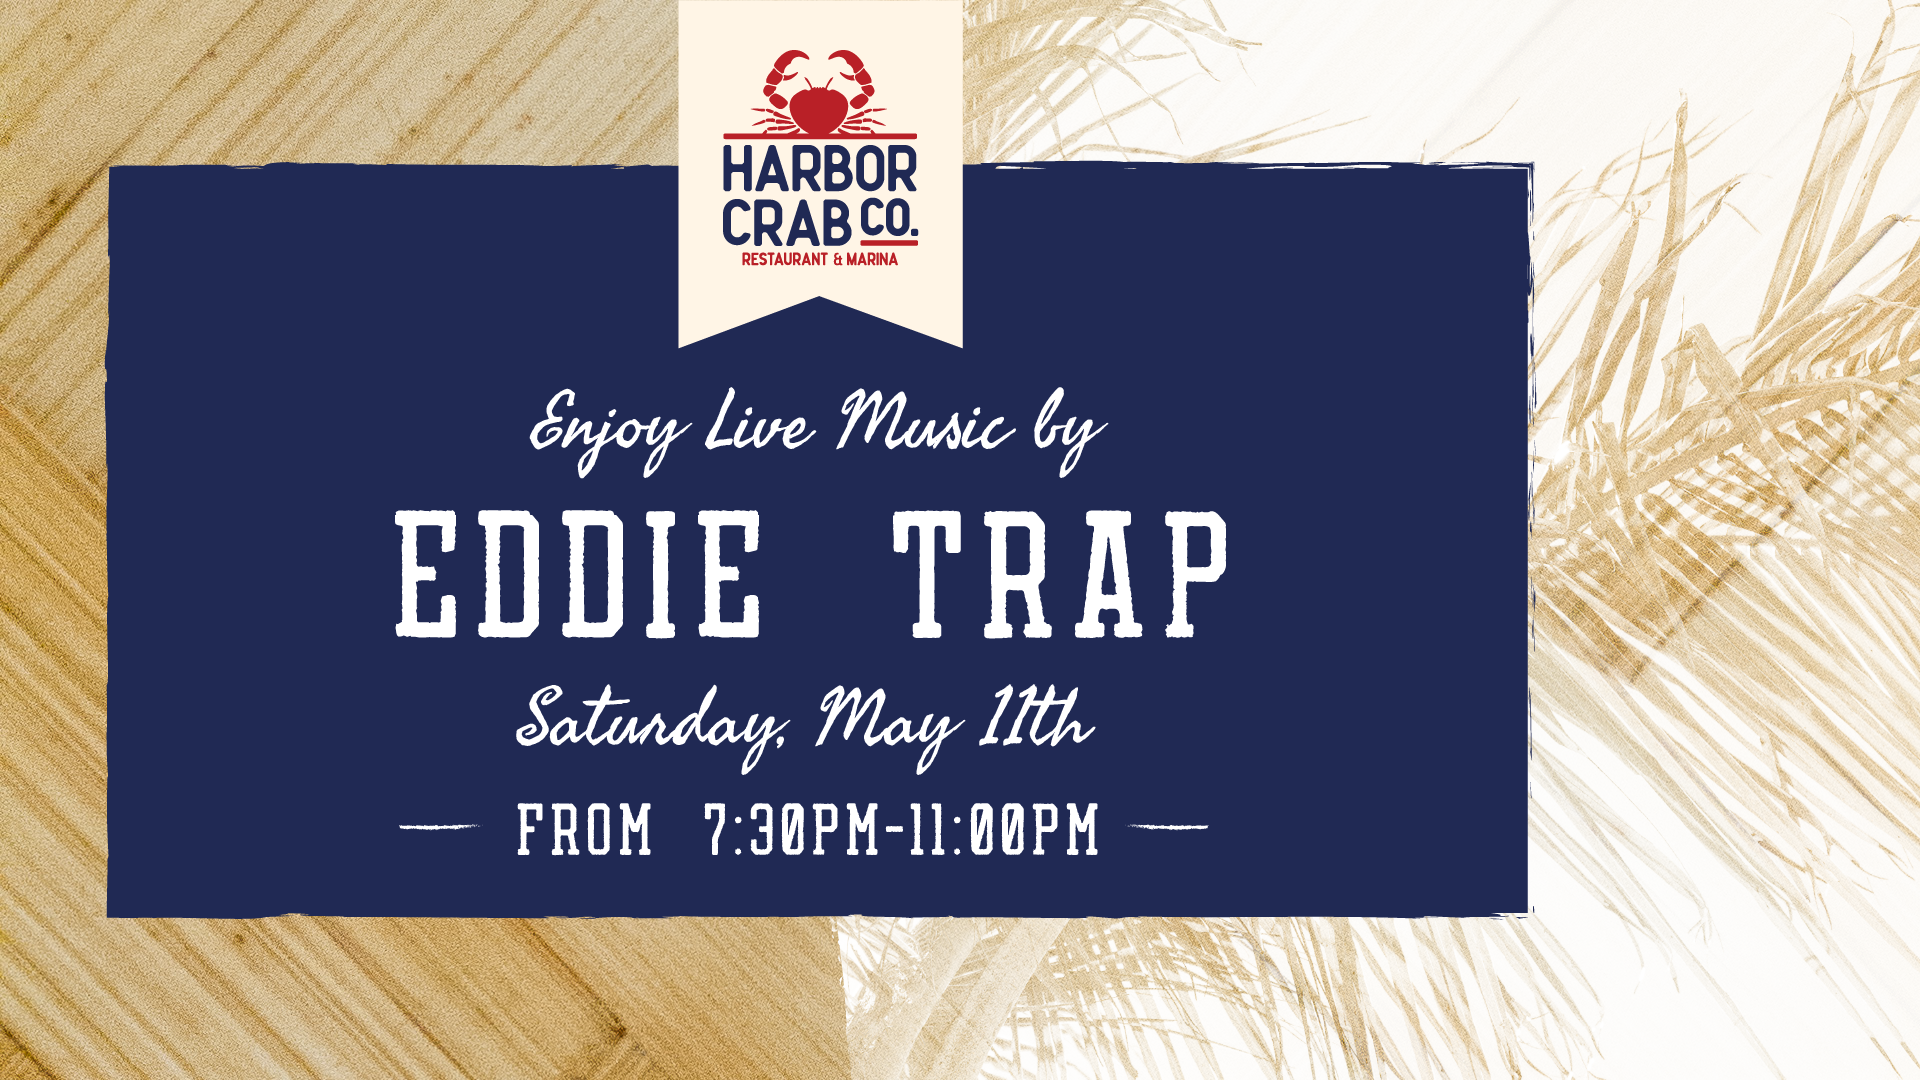 Live music by Eddie Trap at Harbor Crab on May 11, from 7:30 pm to 11:00 pm.